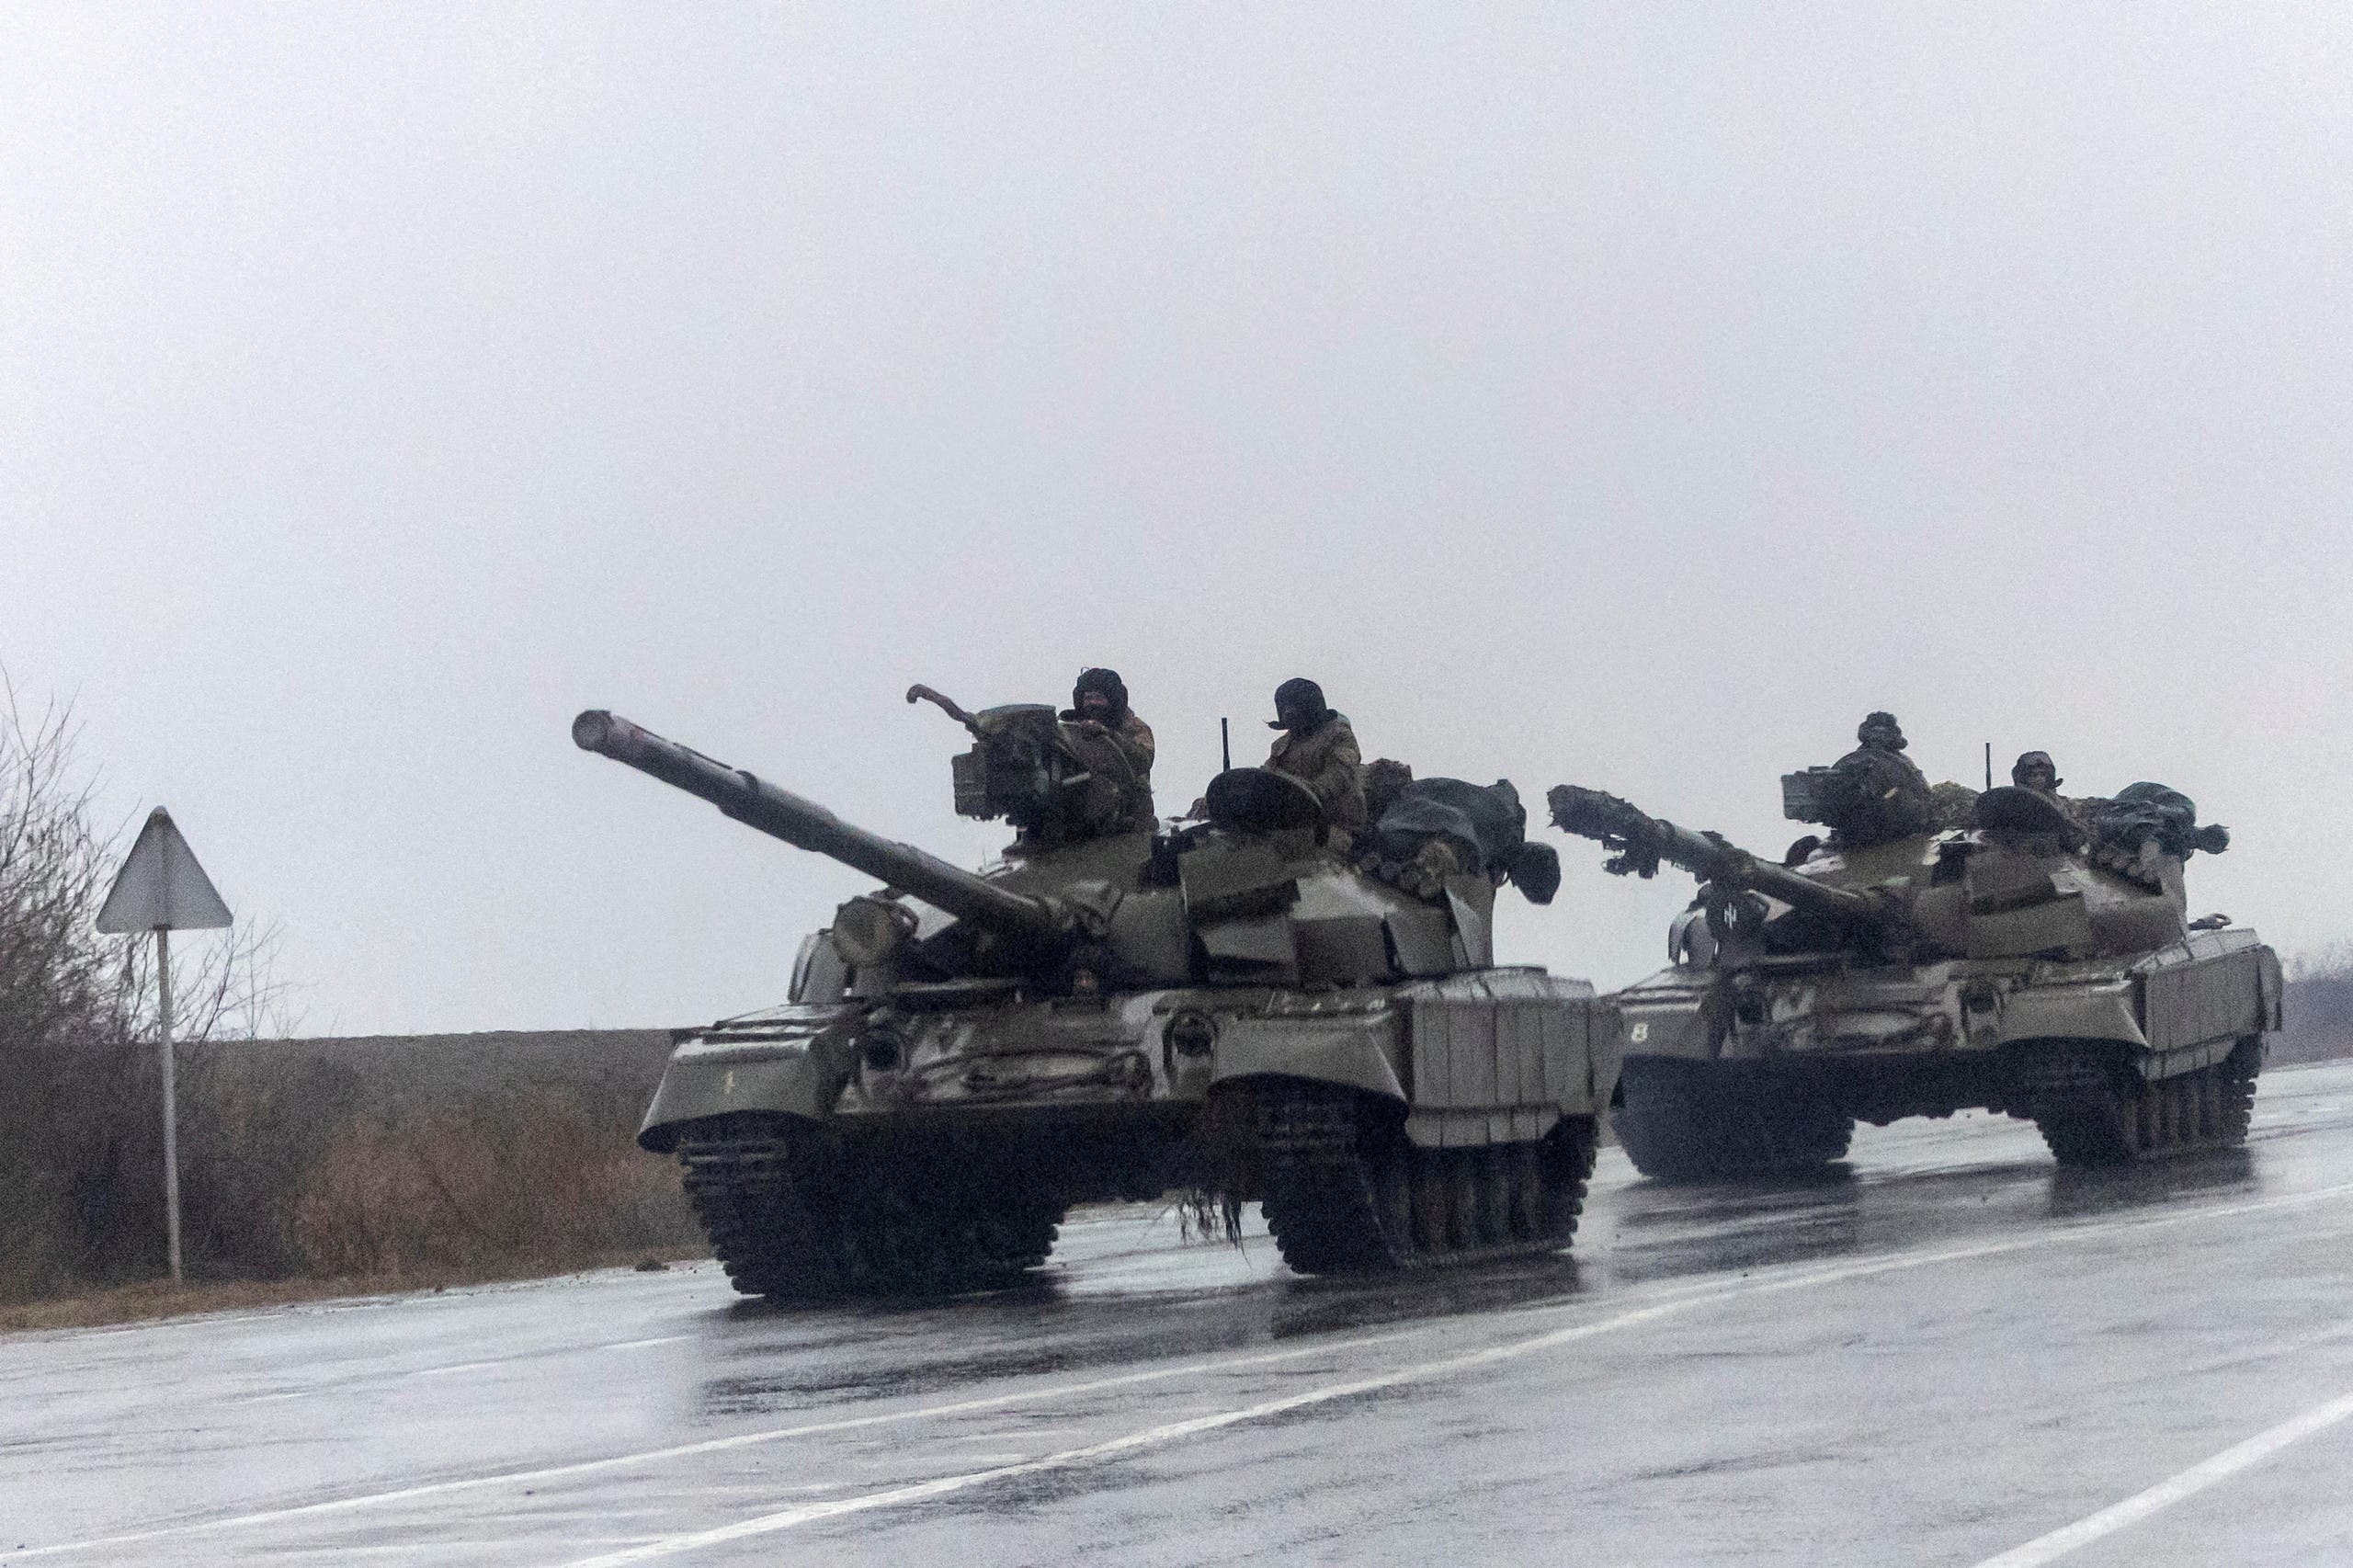 Ukrainian tanks move into the city, after Russian President Vladimir Putin authorized a military operation in eastern Ukraine, in Mariupol, February 24, 2022. (File photo: Reuters)